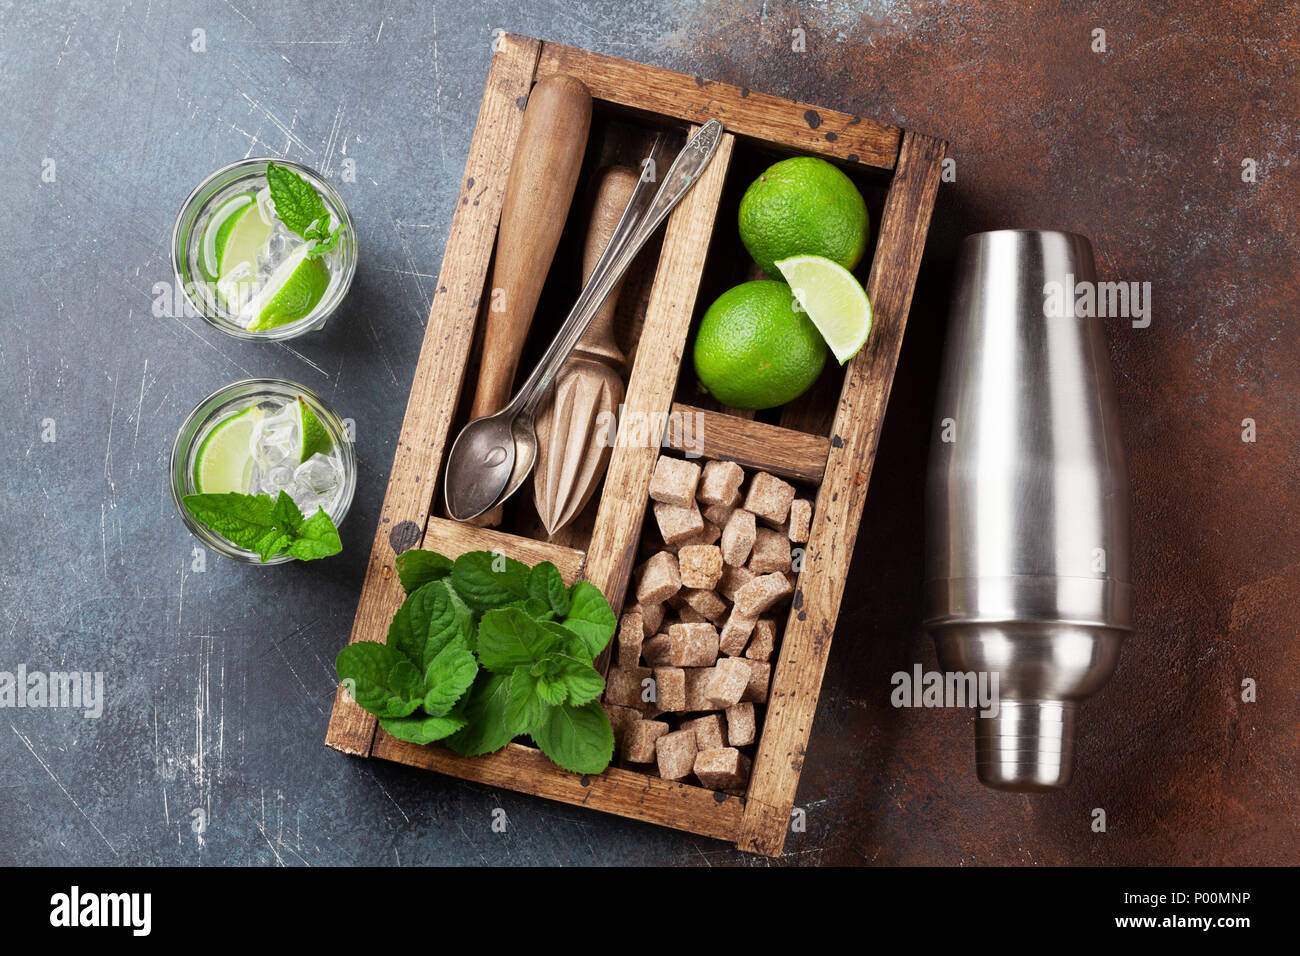 Mojito cocktail ingredients and bar accessories view Stock Photo - Alamy